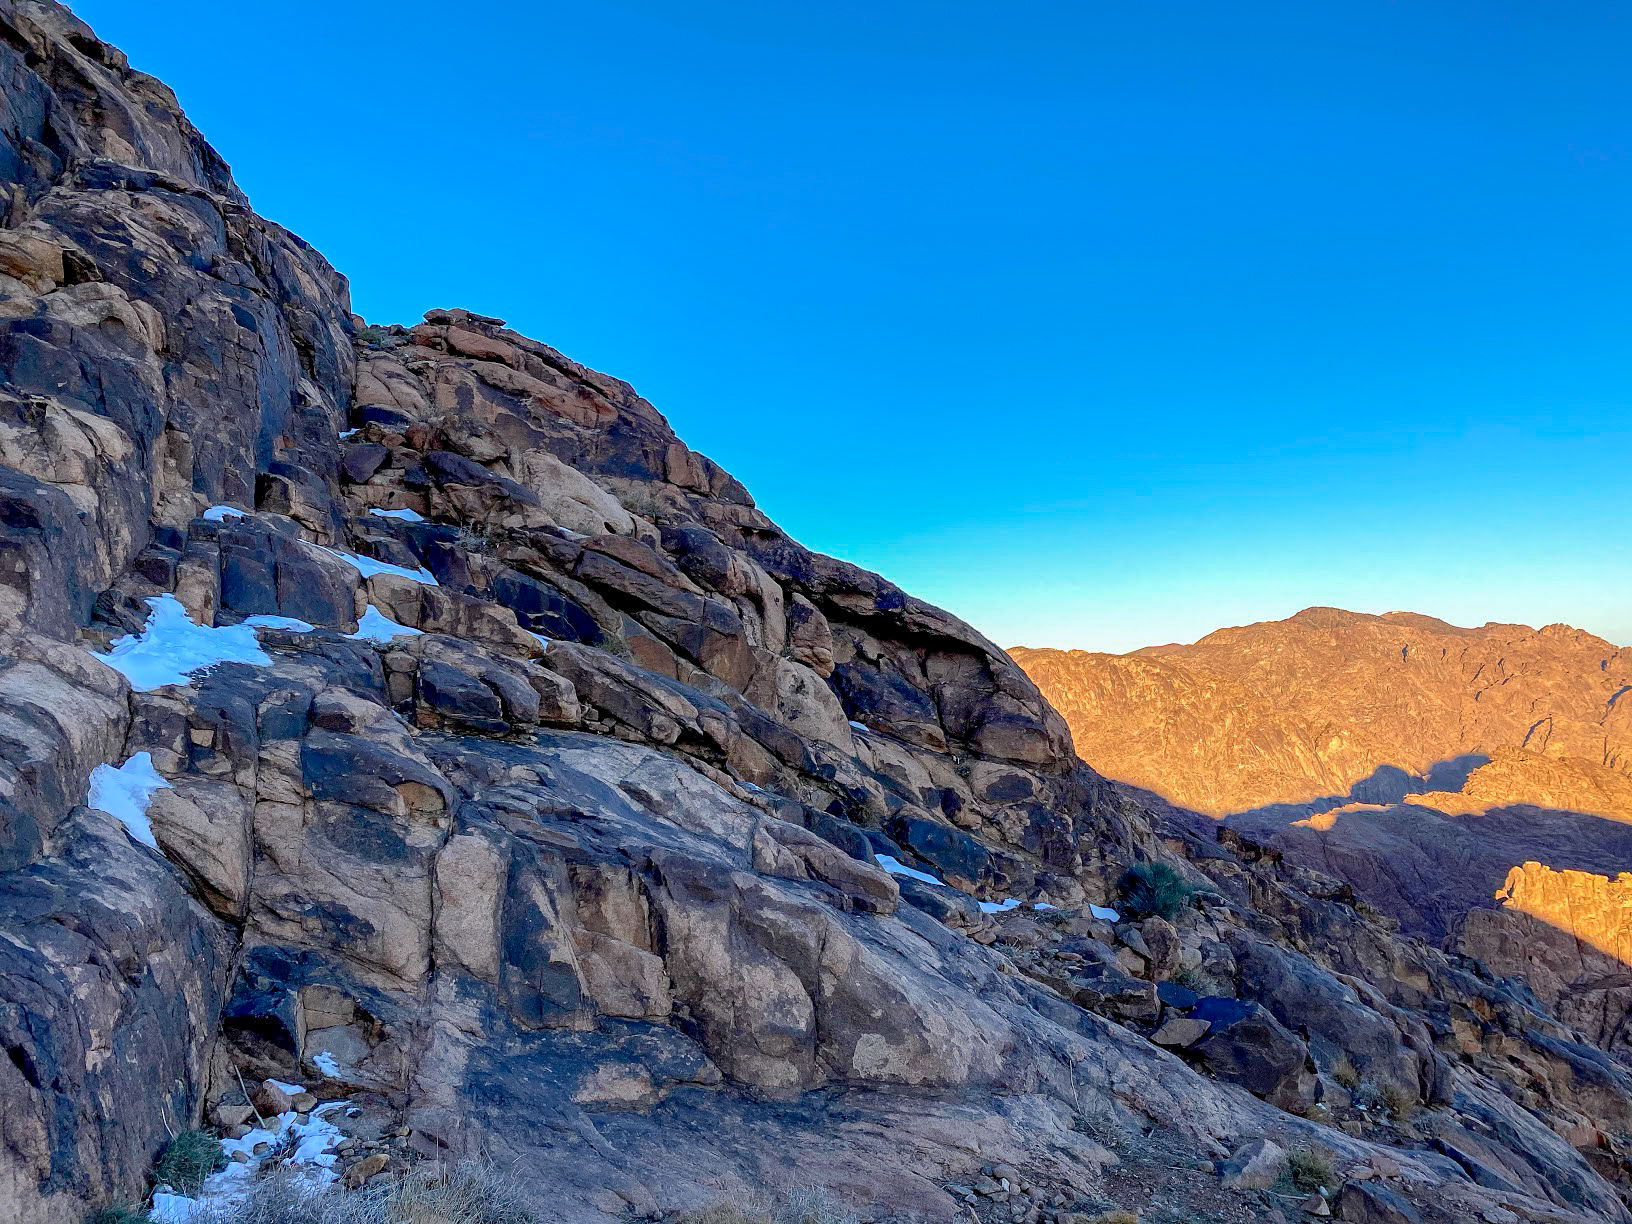 Ice on the rocks of Mount Sinai, Egypt against a clear blue sky